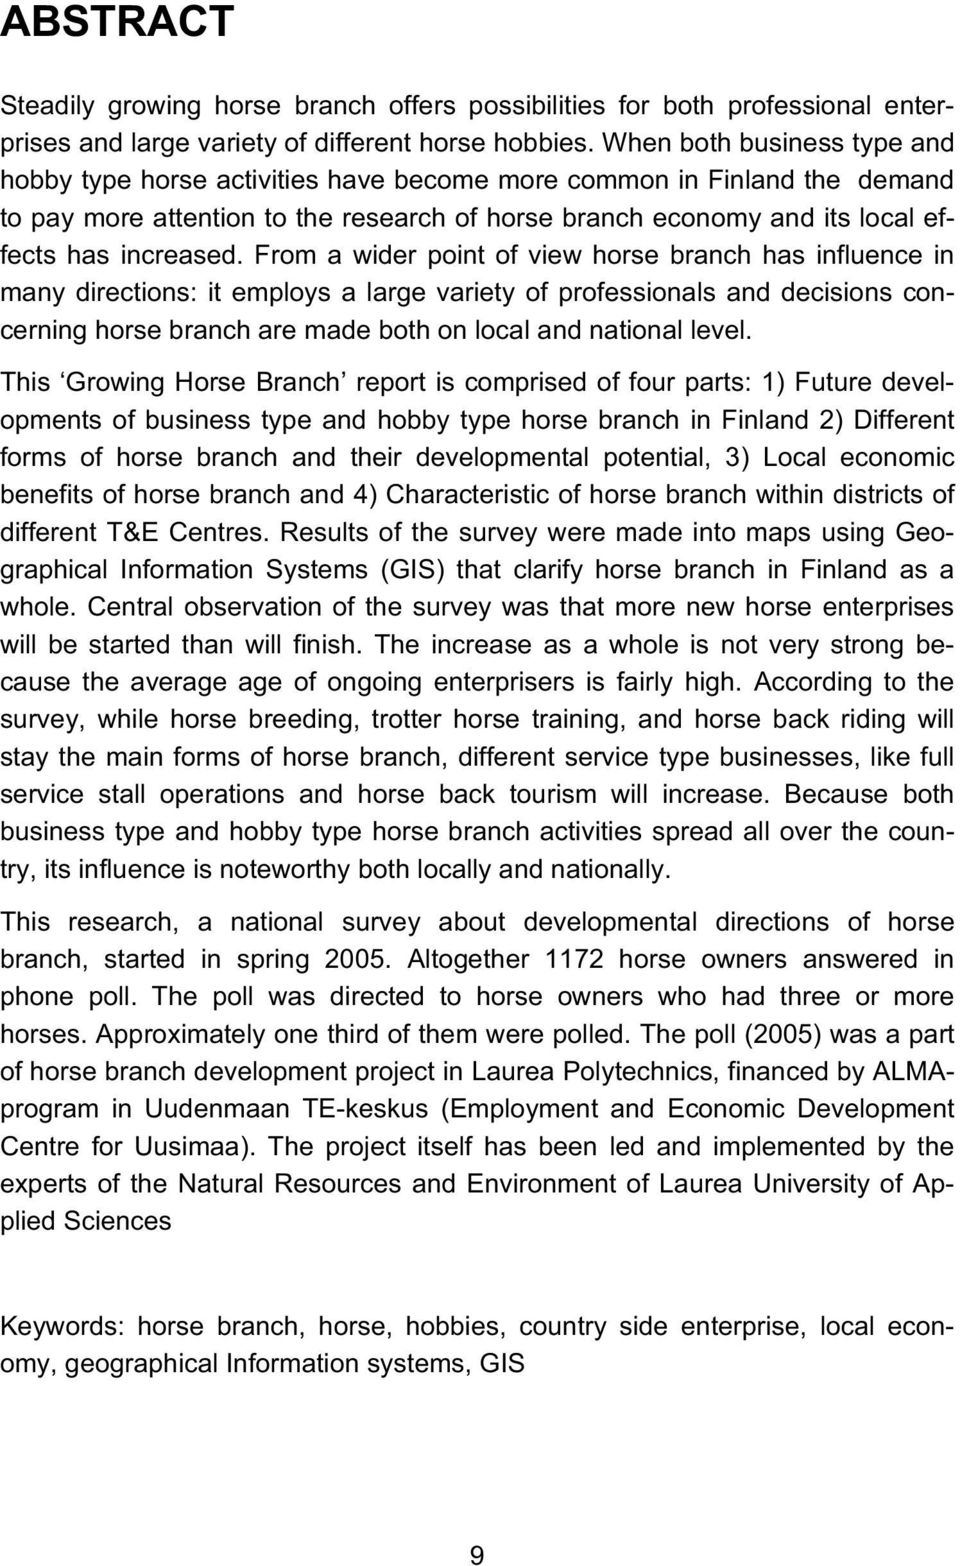 From a wider point of view horse branch has influence in many directions: it employs a large variety of professionals and decisions concerning horse branch are made both on local and national level.